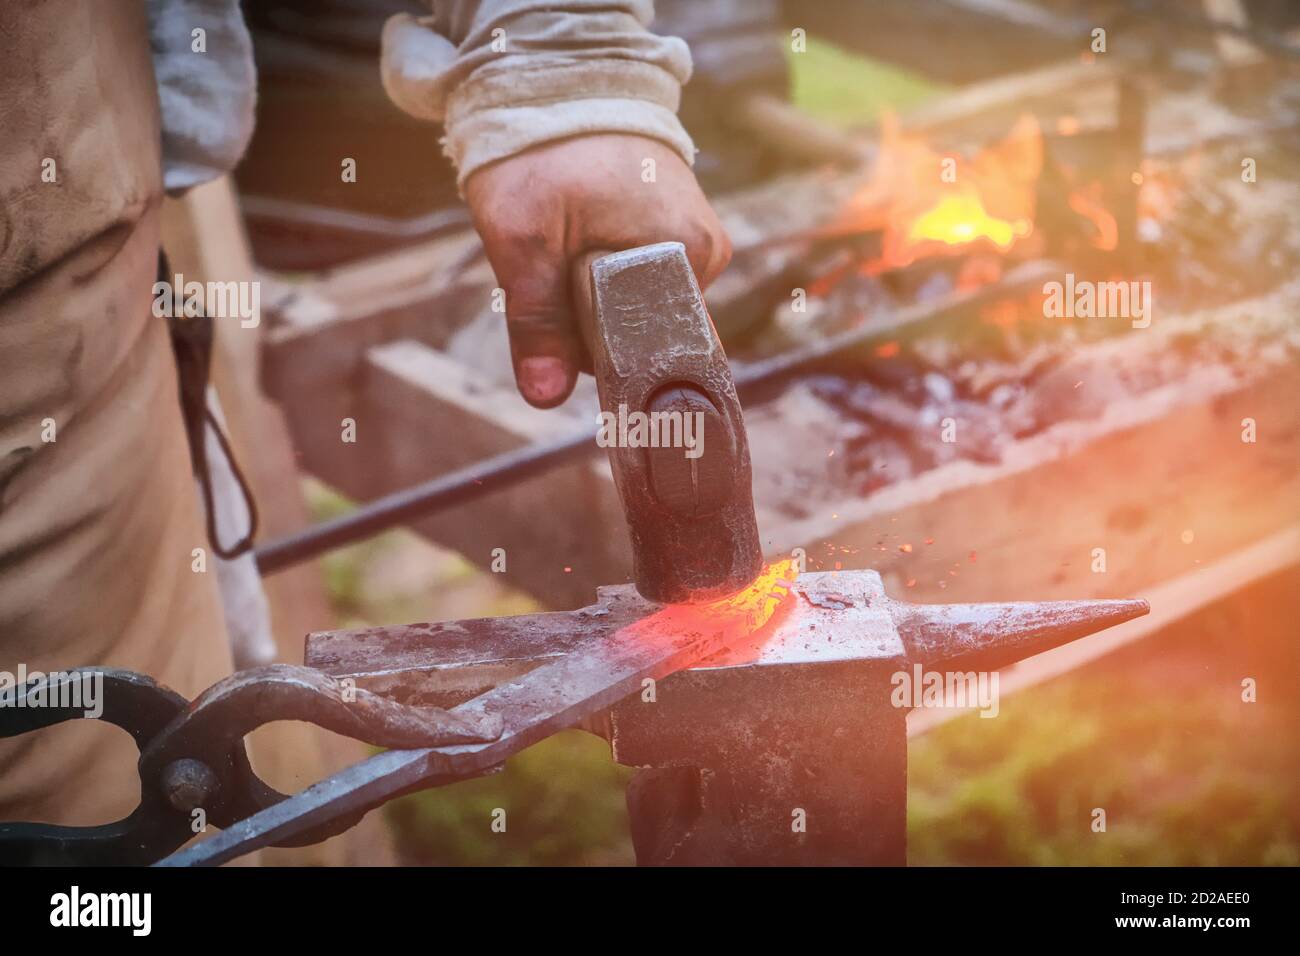 The blacksmith strikes the red blade of the sword with a hammer. Work in the forge to create weapons. The knife is between a rock and a hard place. Stock Photo